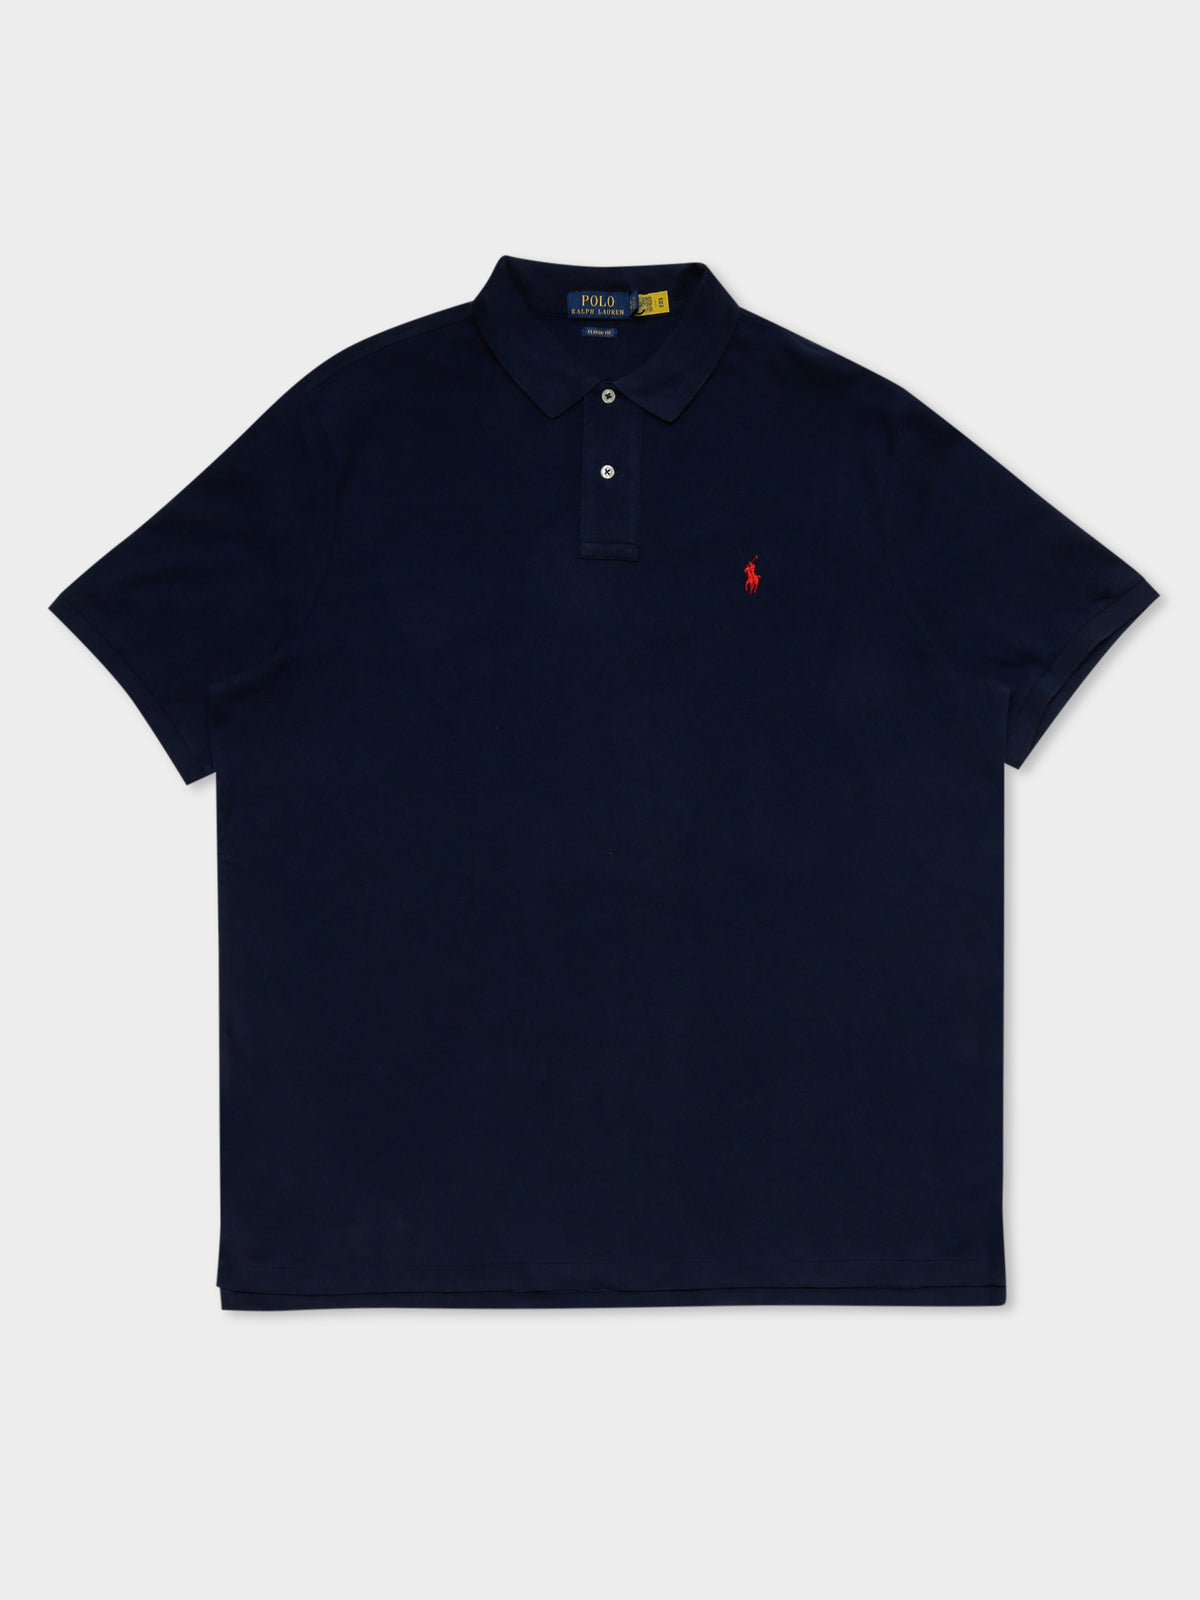 Classic Fit Mesh Polo in Newport Navy